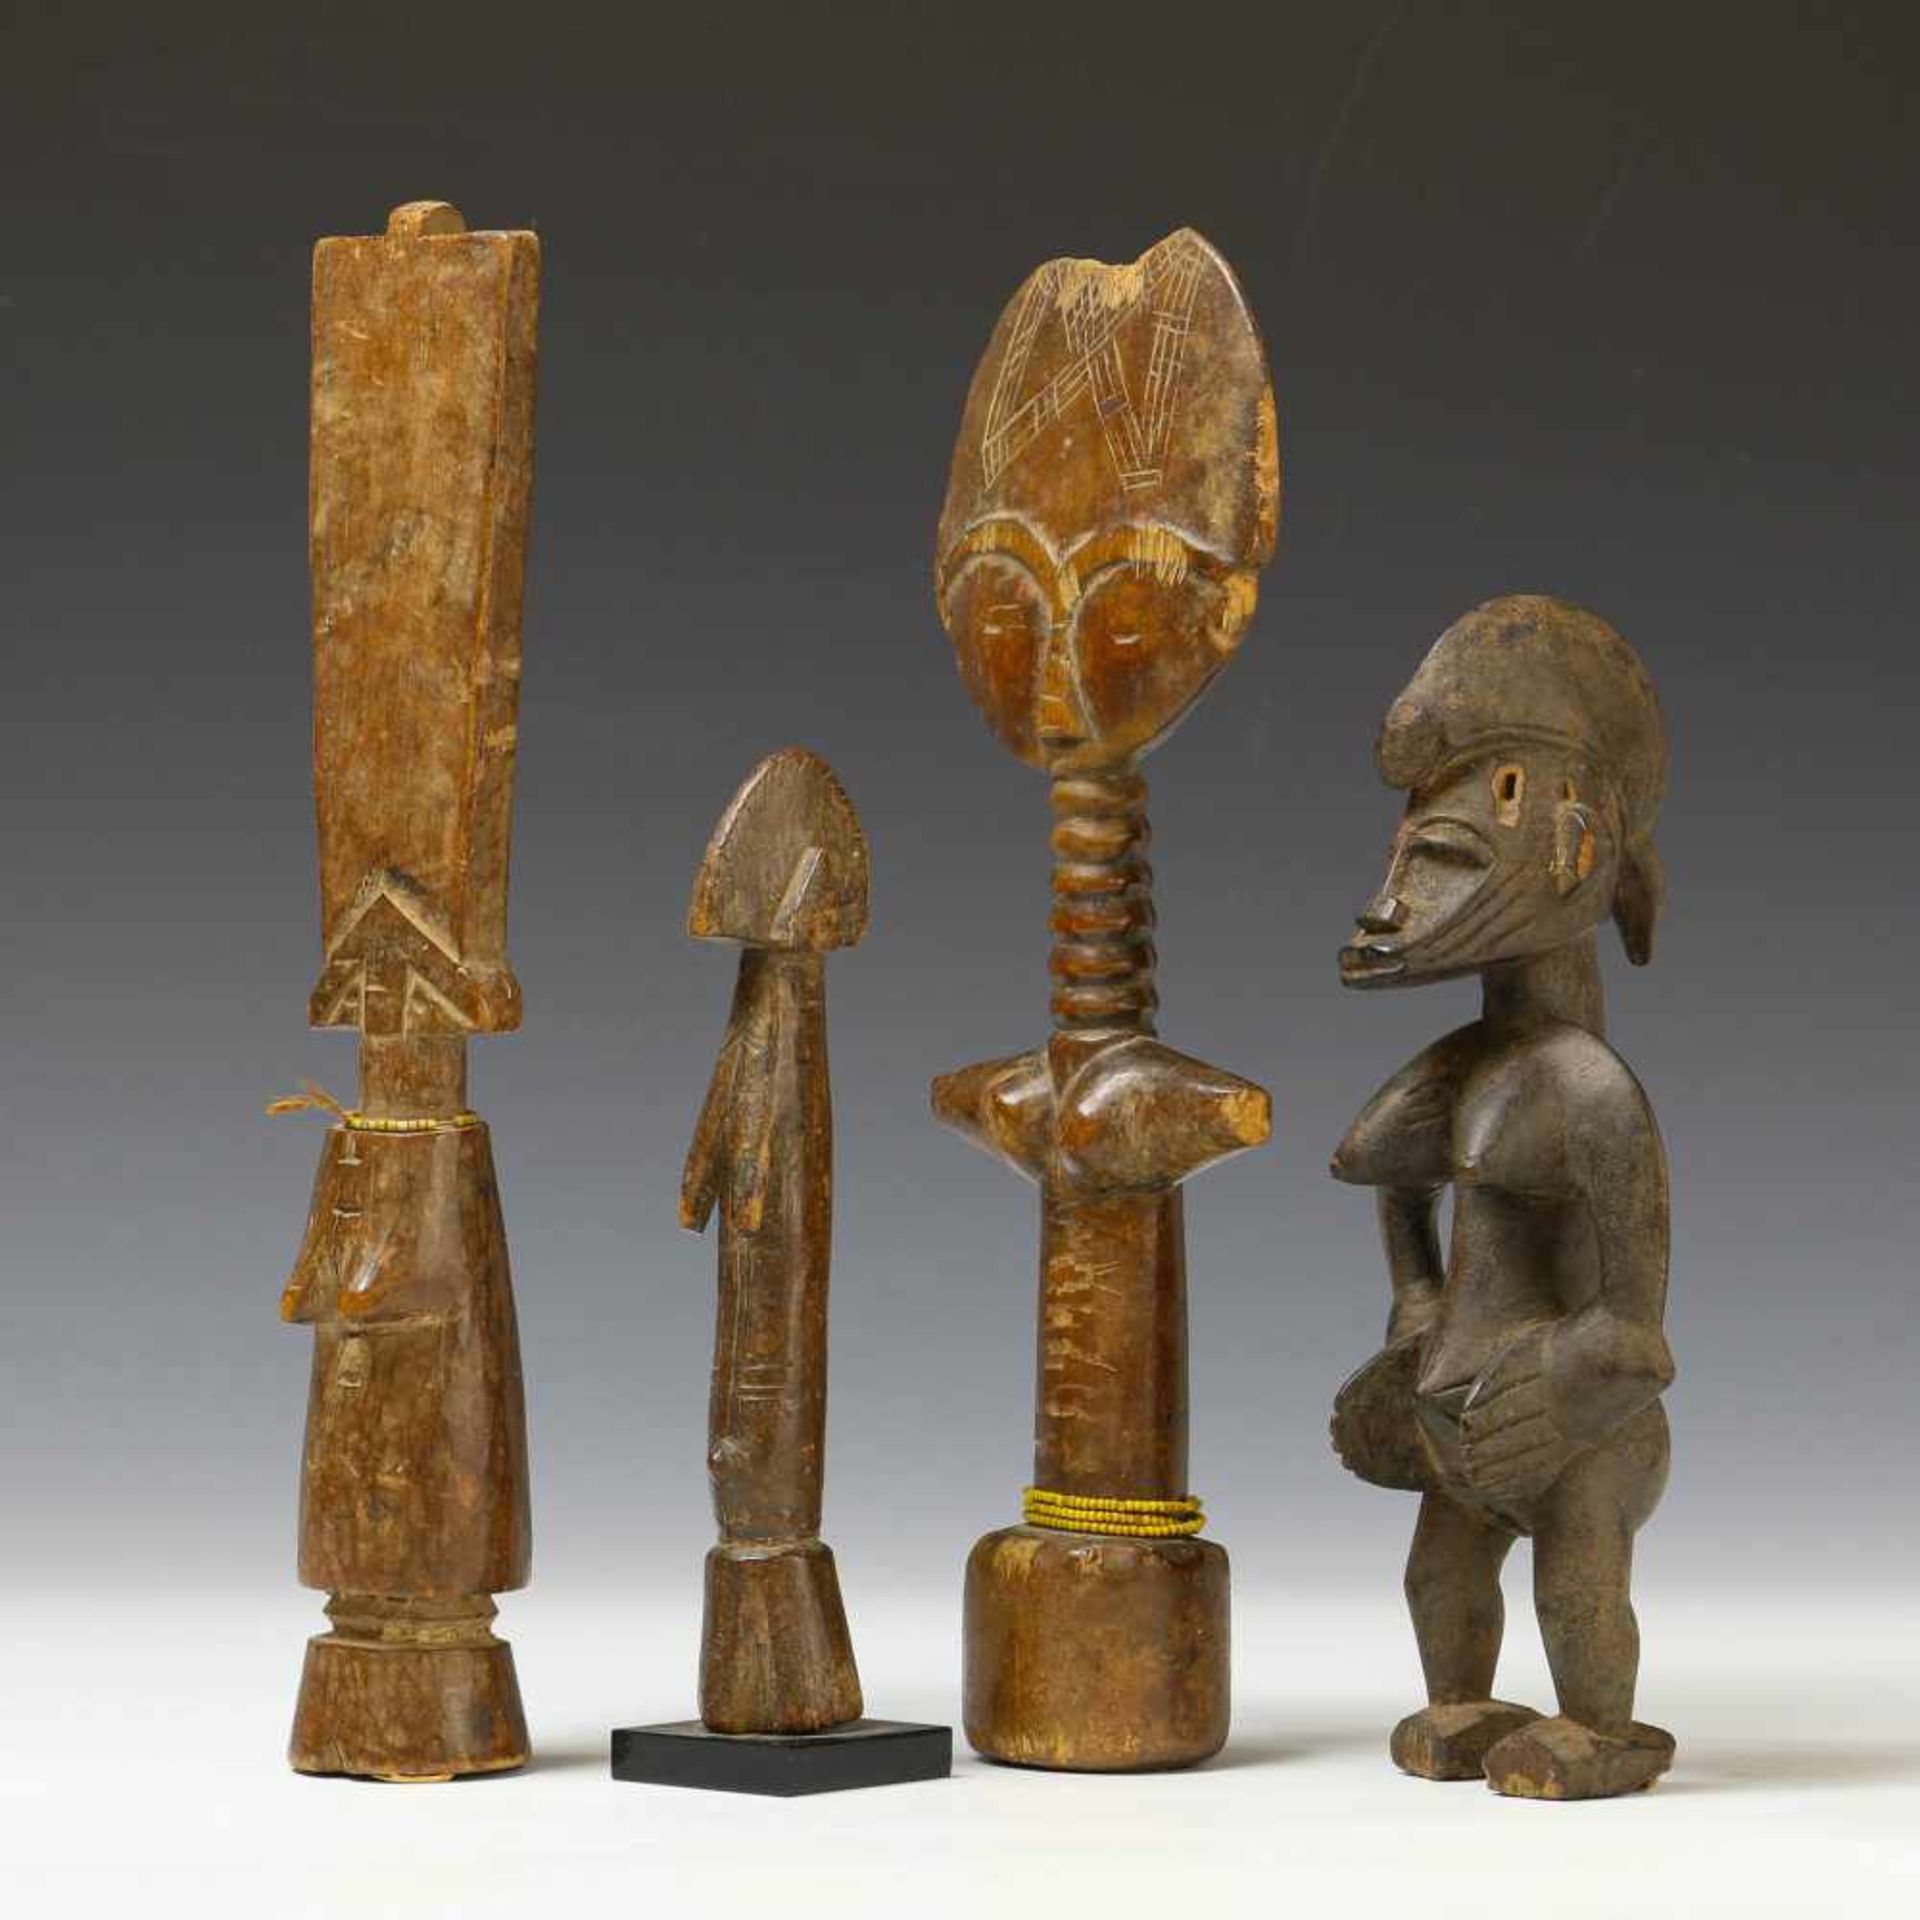 Four West African small figures, h. 18 and 28,5 cm. [4]400